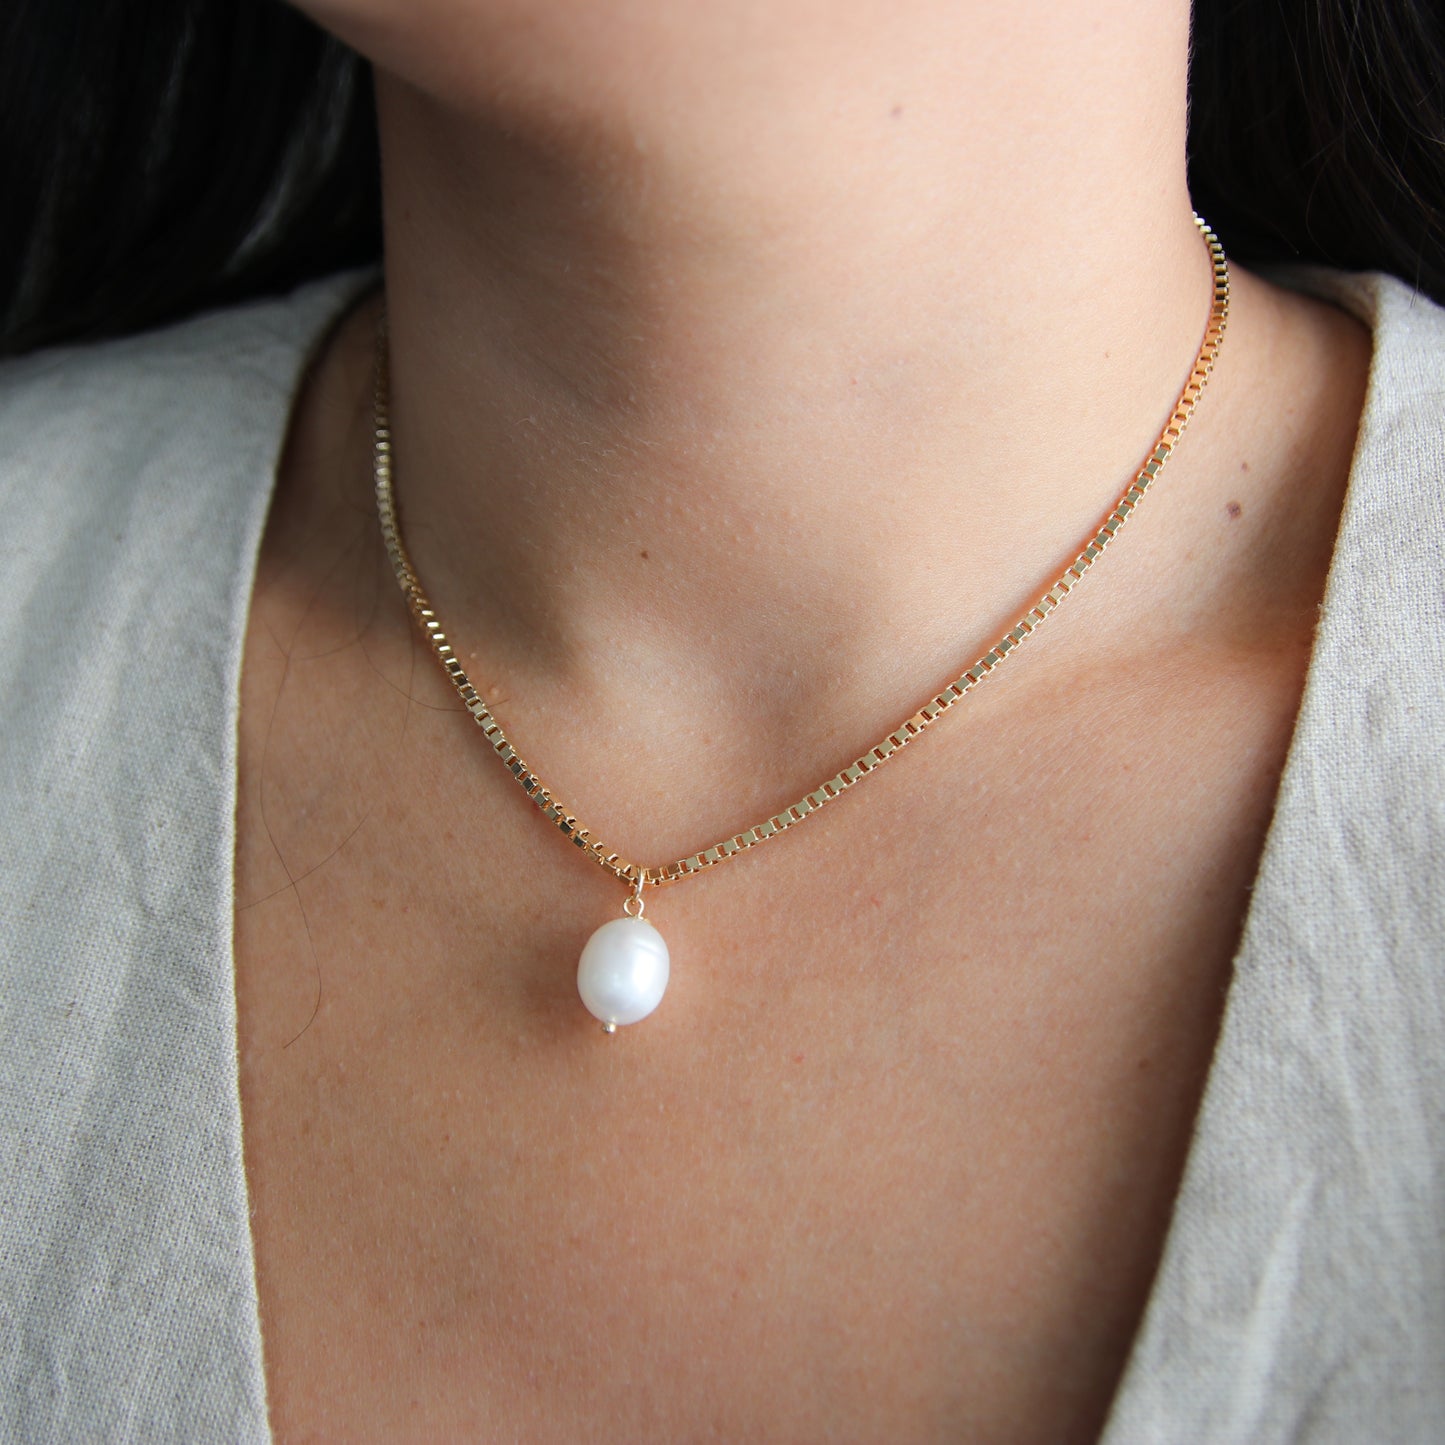 Dangling Pearl Box Chain Necklace